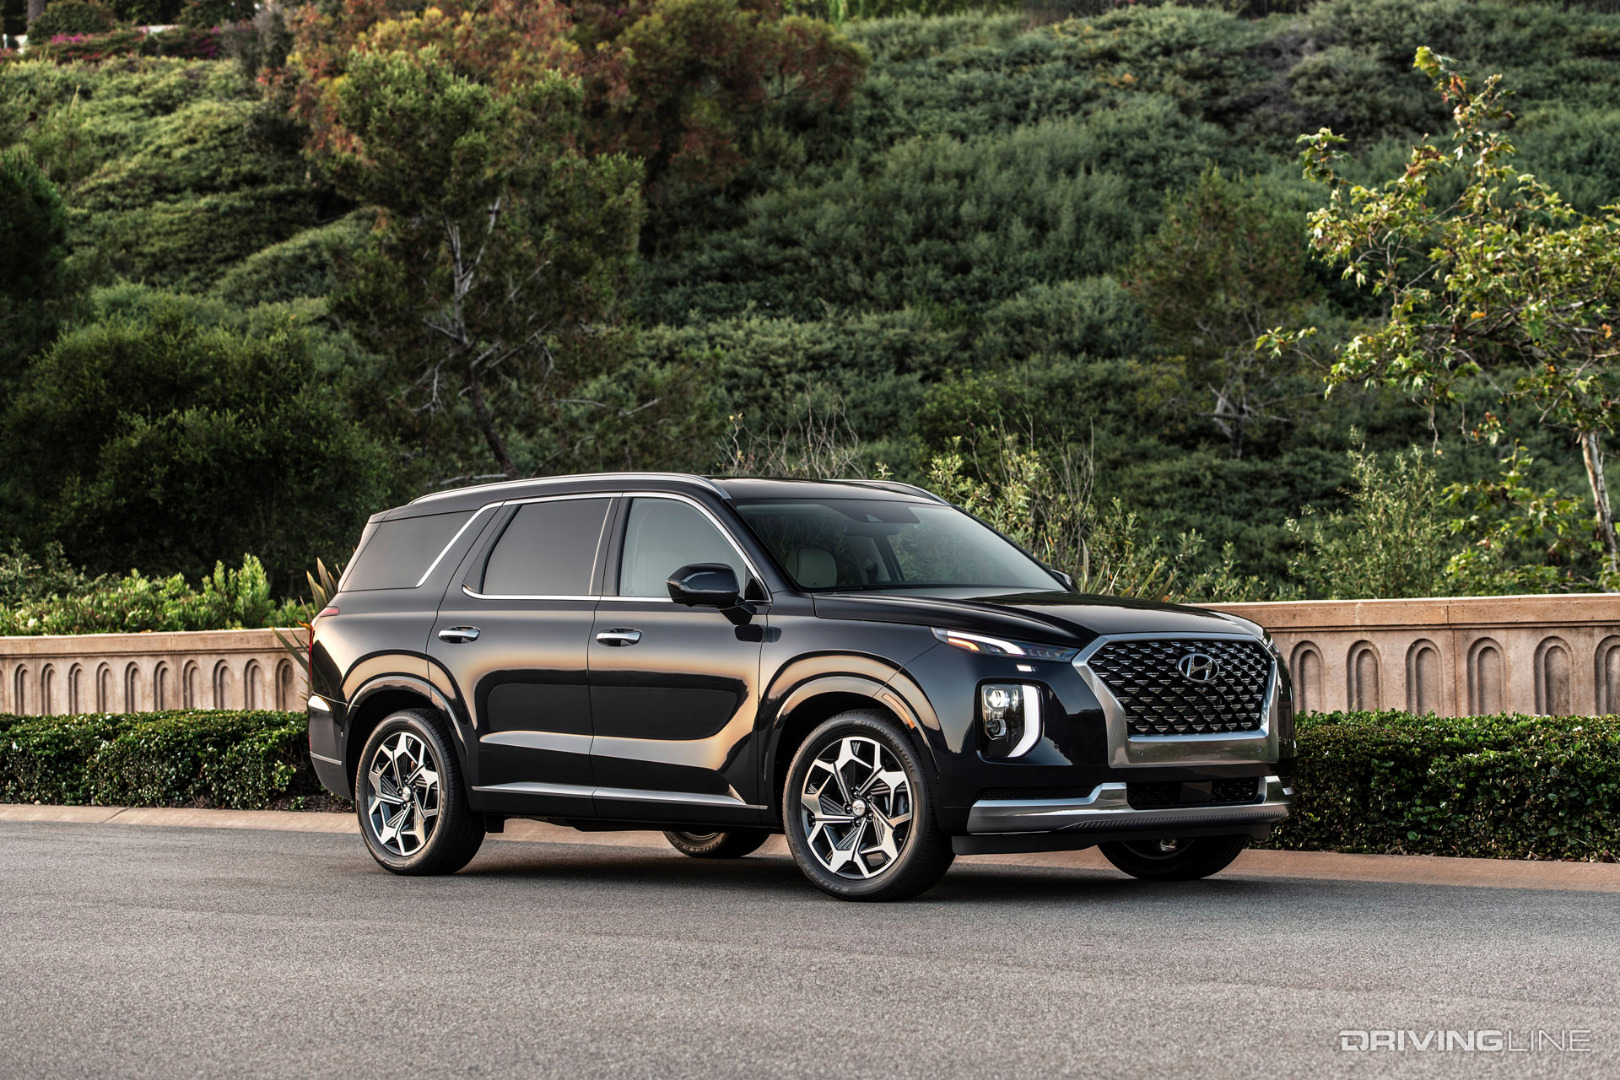 The Ideal, Modestly-Priced Mid-Sized SUV With Third-Row Seating: Part